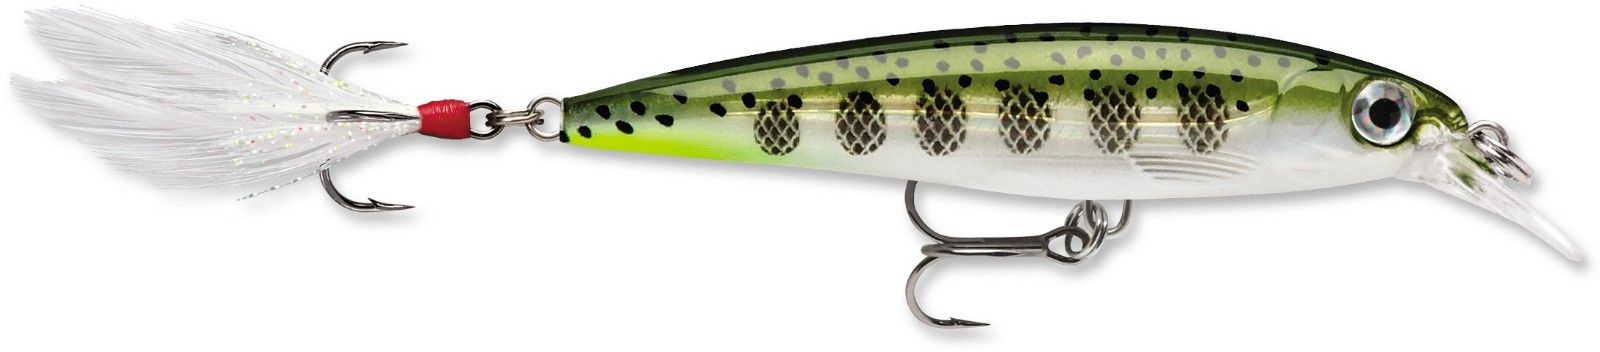 Rapala Crappie Fishing Baits, Lures & Flies for sale